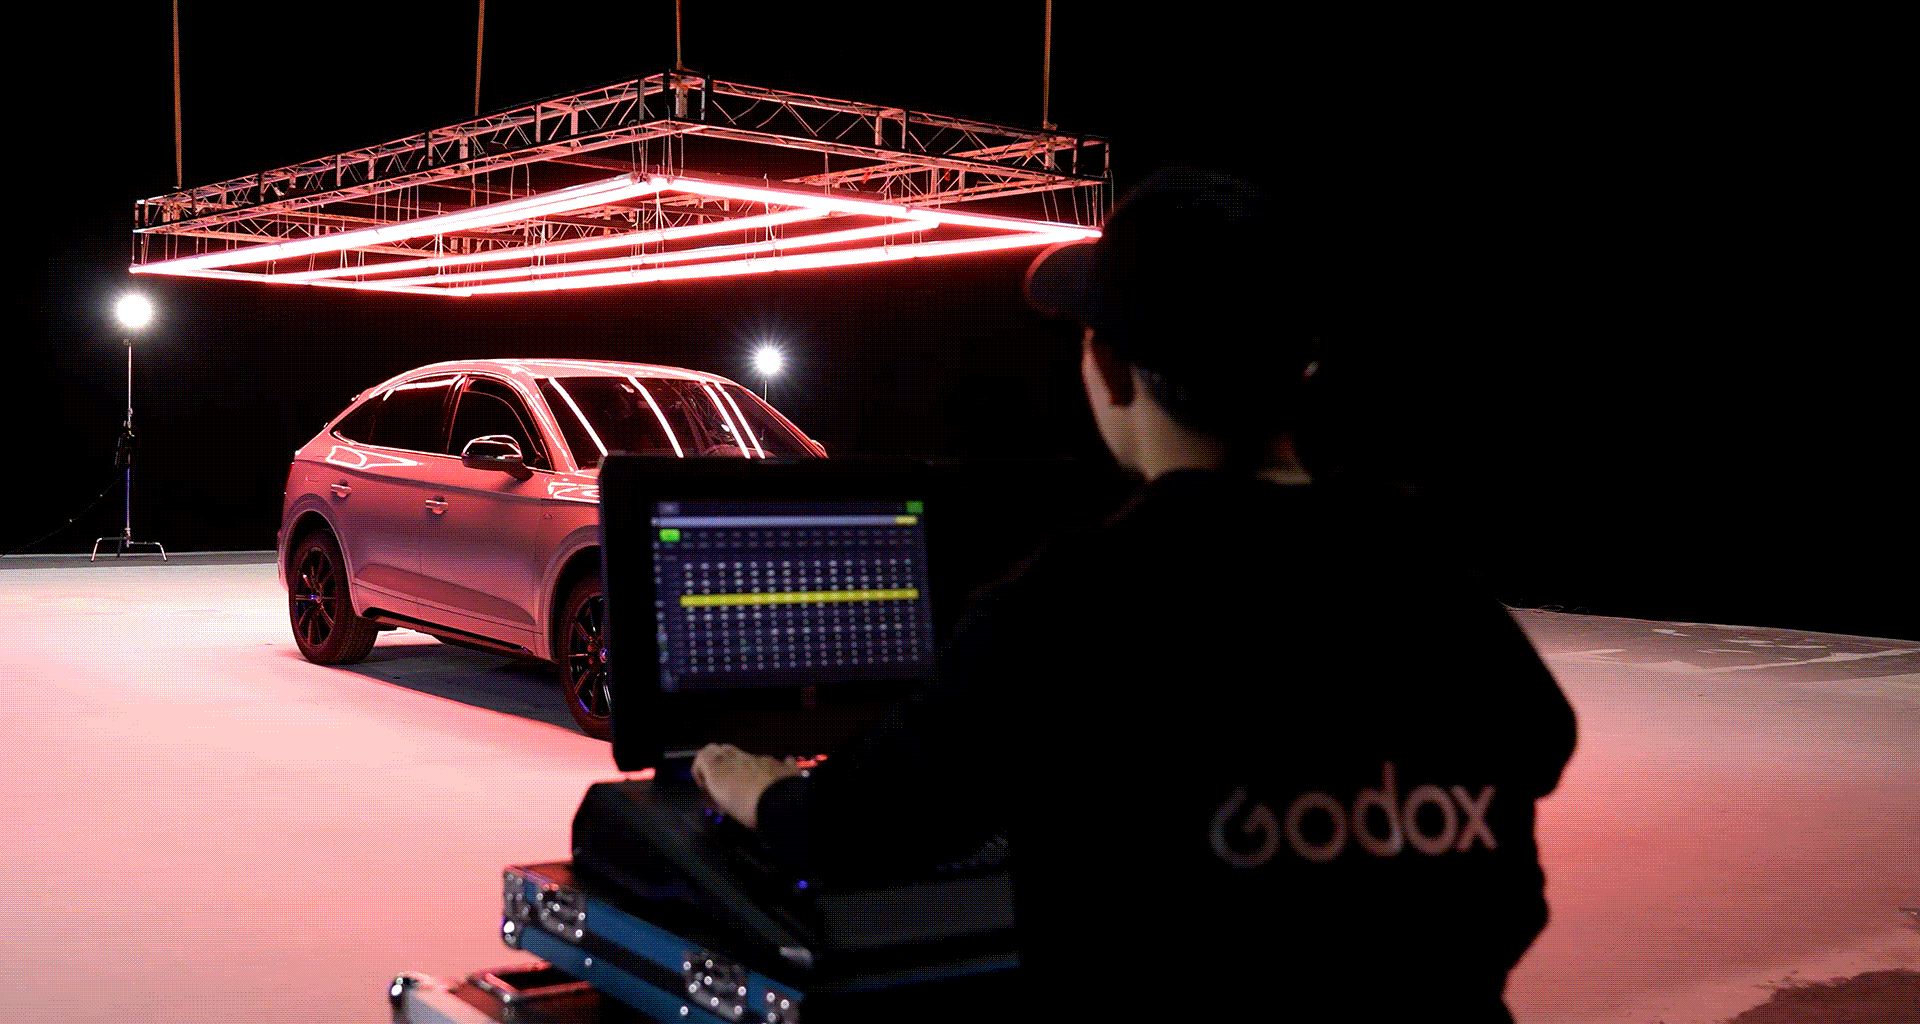 GODOX KNOWLED TP2R -K4 RGBWW Pixel Tube Light being controlled by a DMX control console